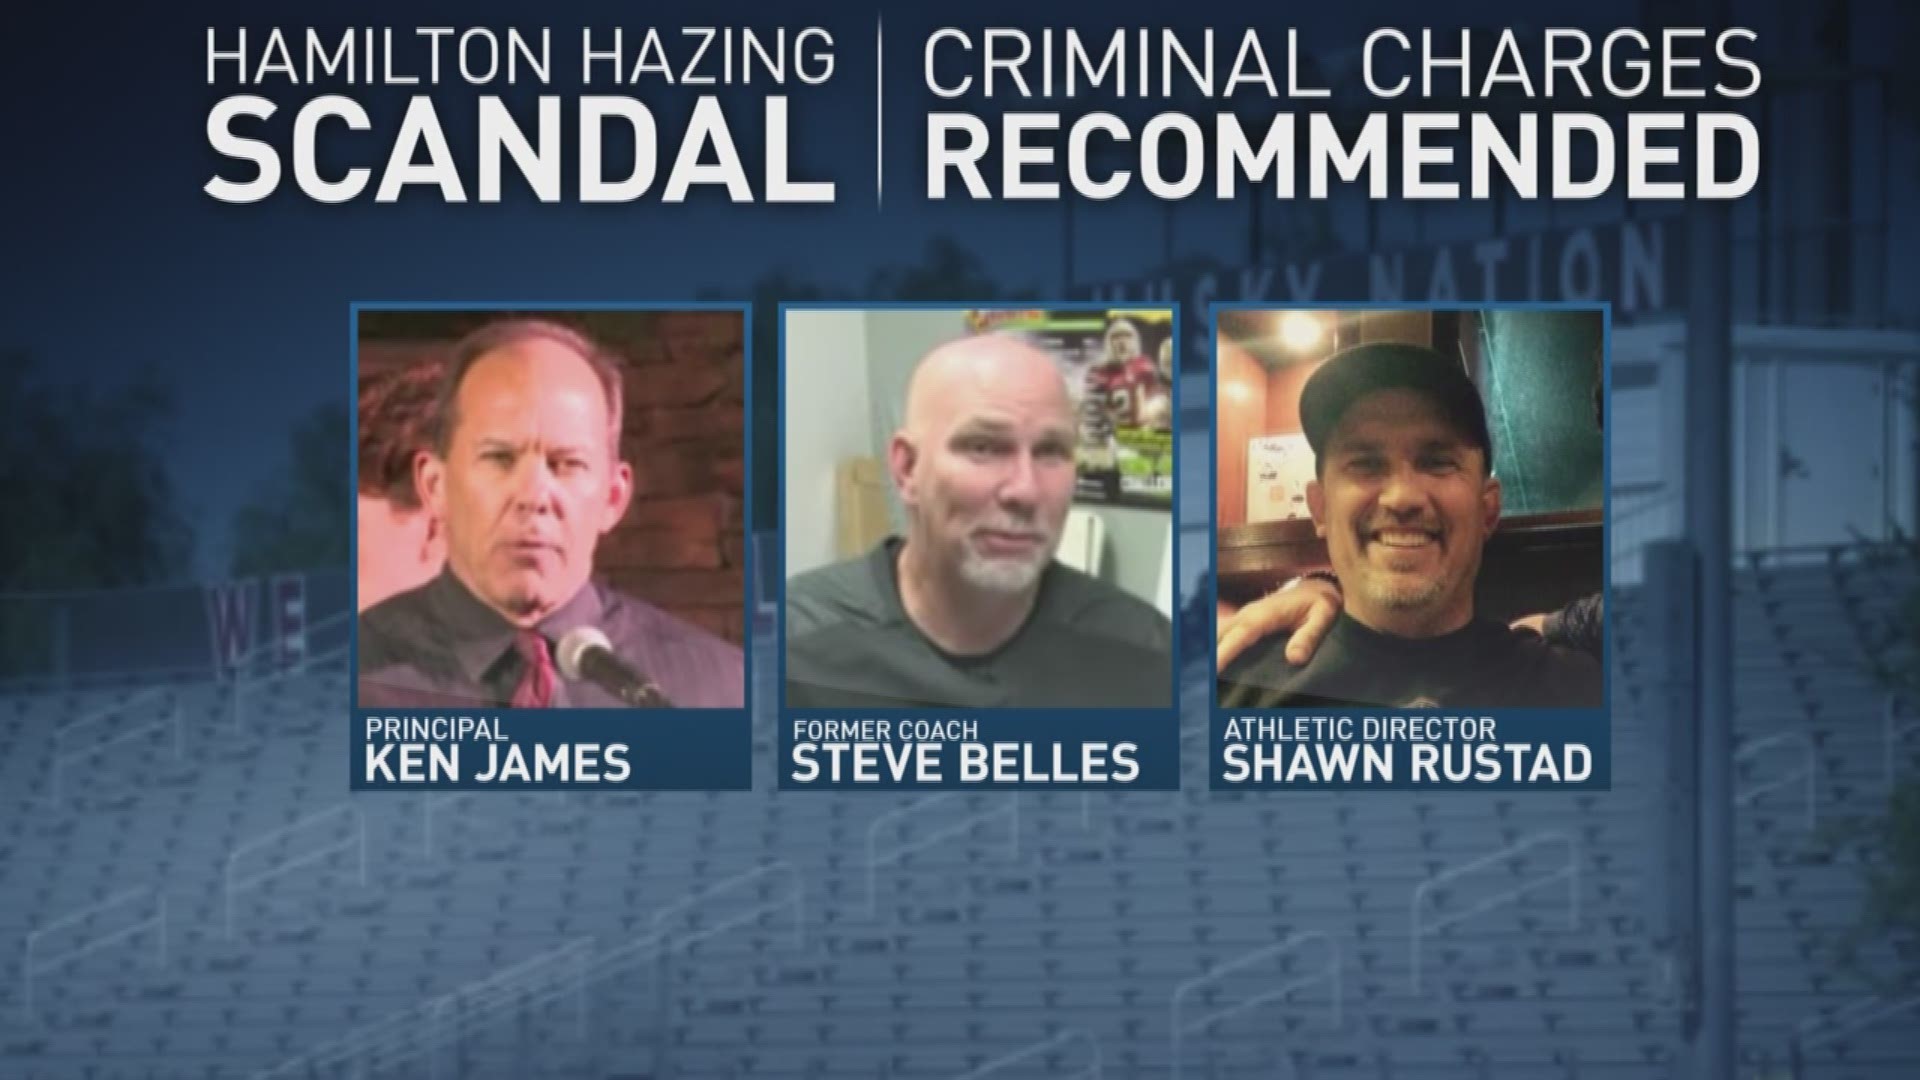 Hamilton High School's alleged hazing scandal continues to evolve. New reports from Chandler police show athletic director Shawn Rustad didn't report incidents.